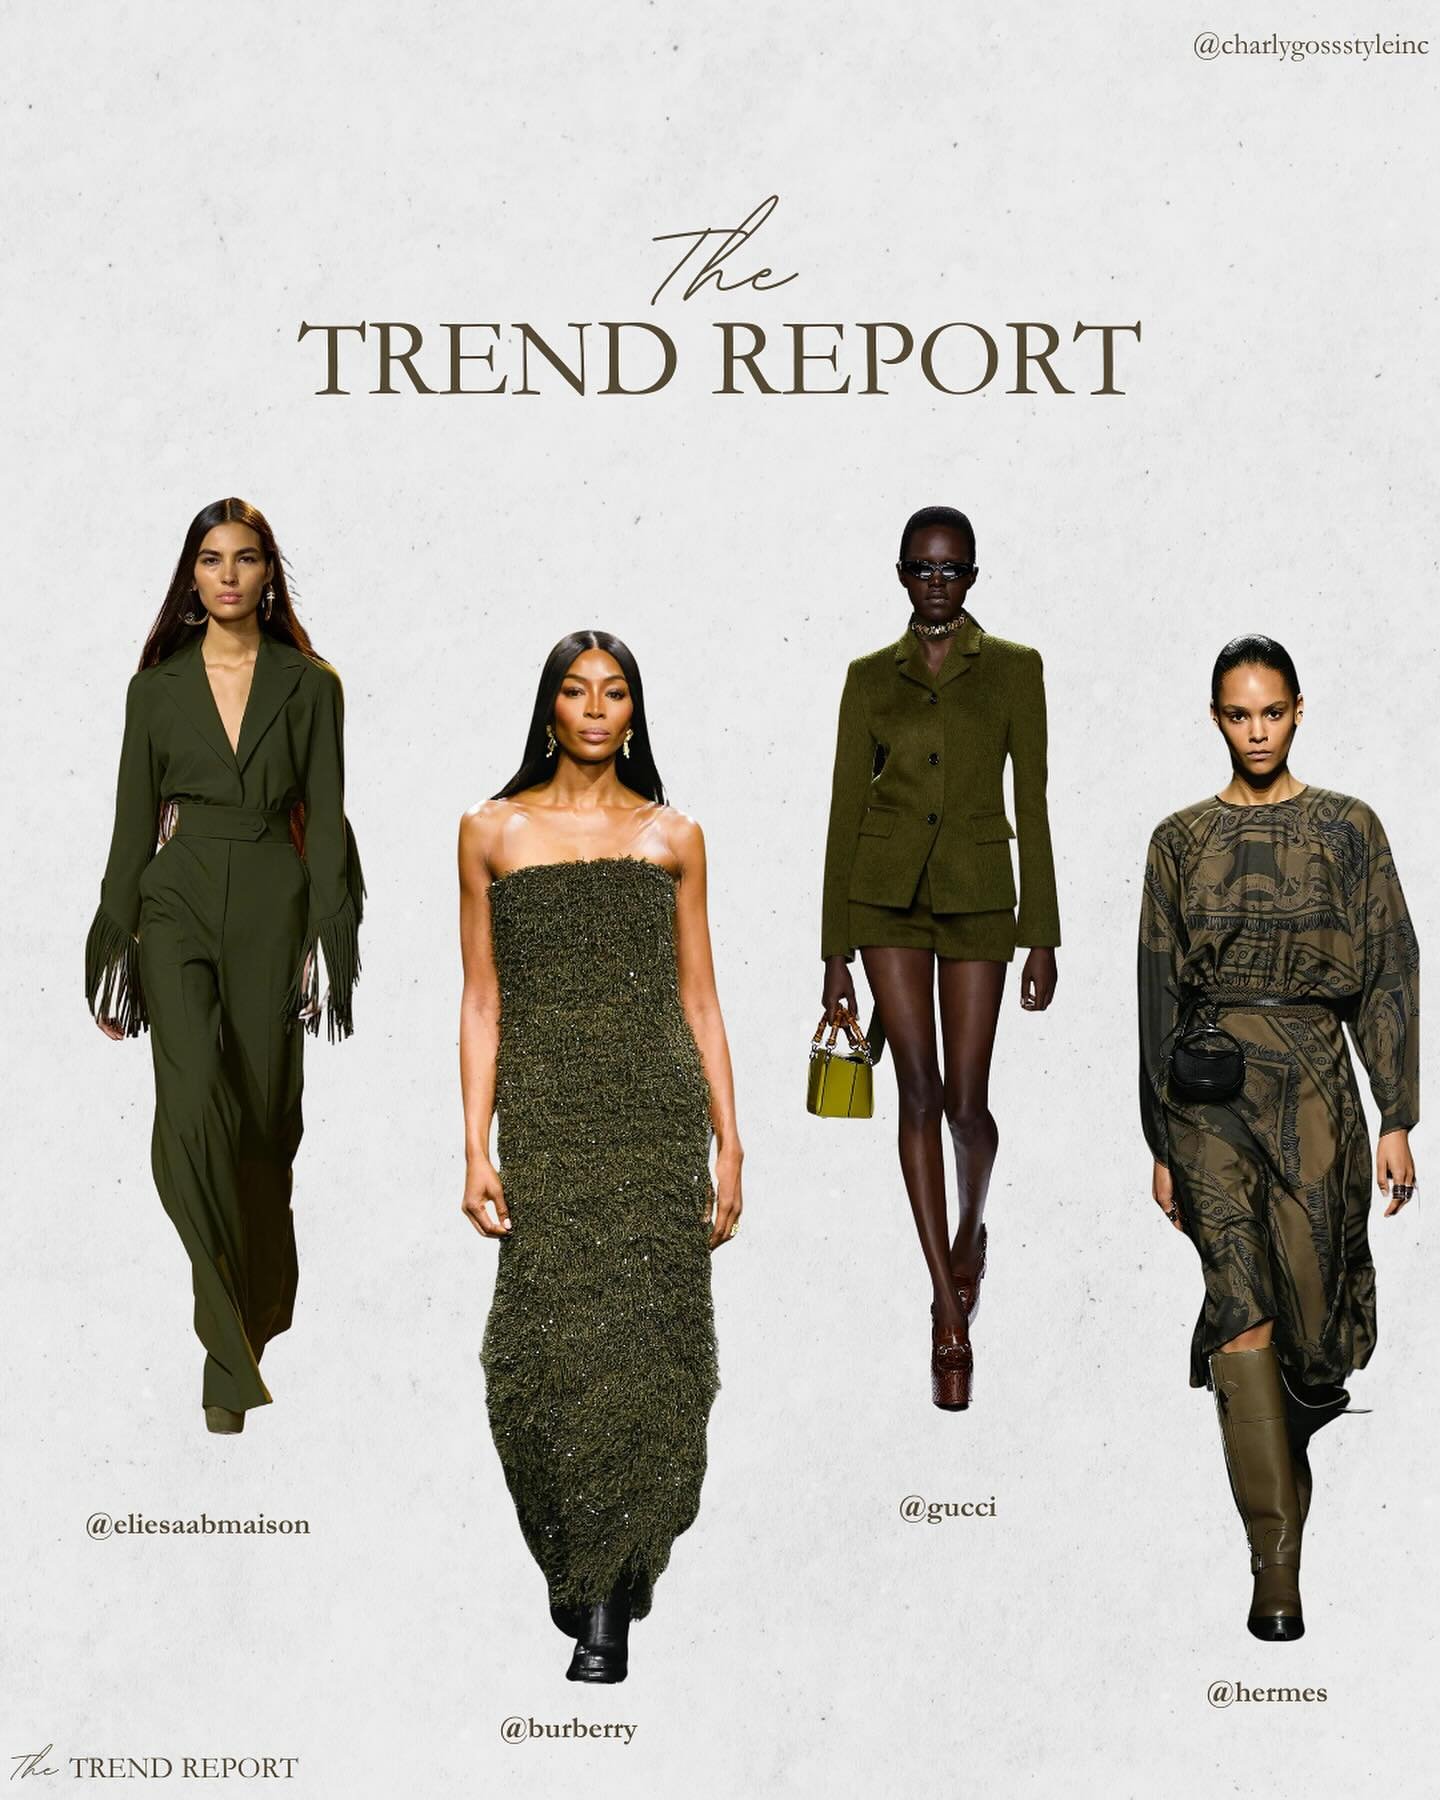 THE TREND REPORT: Olive Green

Olive green is quickly becoming the must-have color for 2024! Not only is it versatile, but this earthy hue is the perfect subtle pop of color that will take you from spring all the way through fall/winter. Wear it head